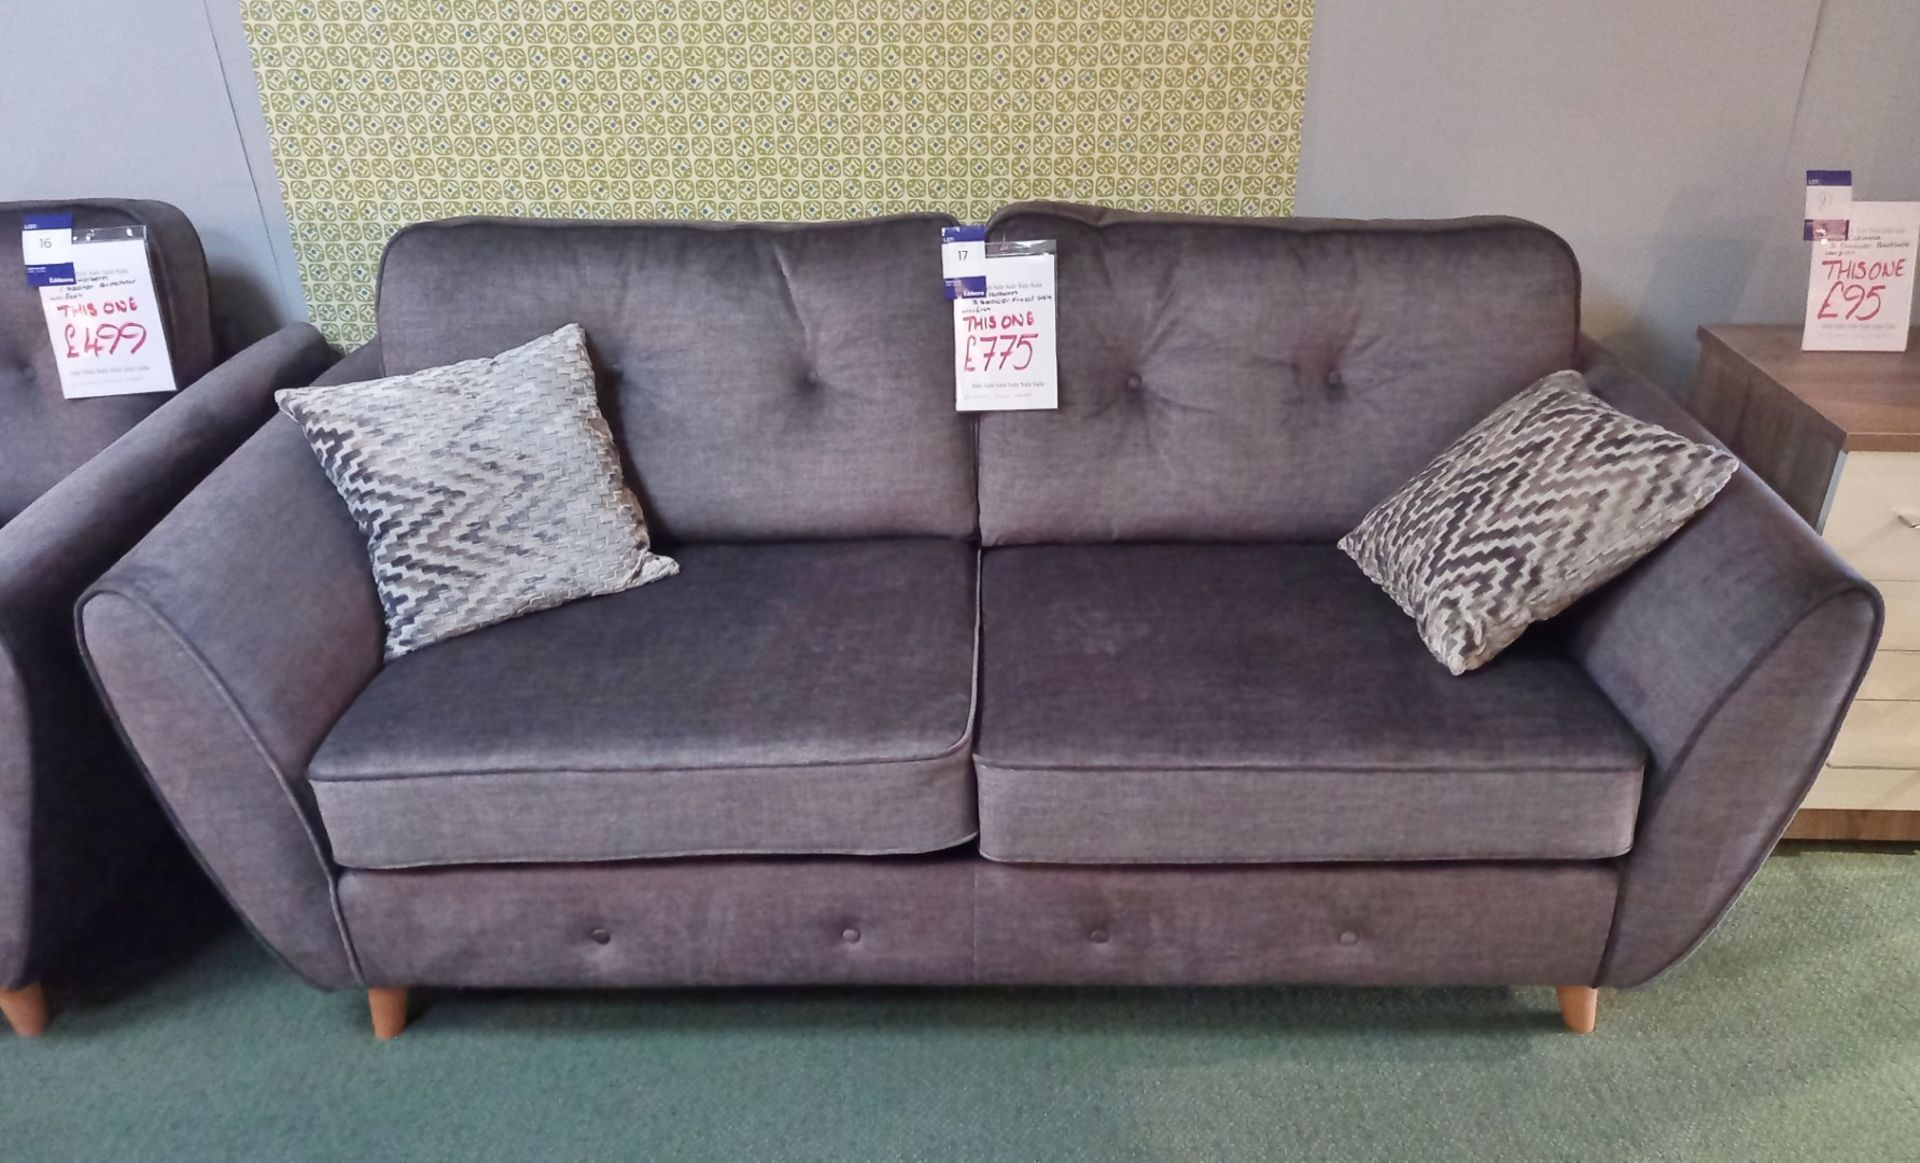 Holborn 3-Seater Sofa Rrp. £775 - Image 4 of 4